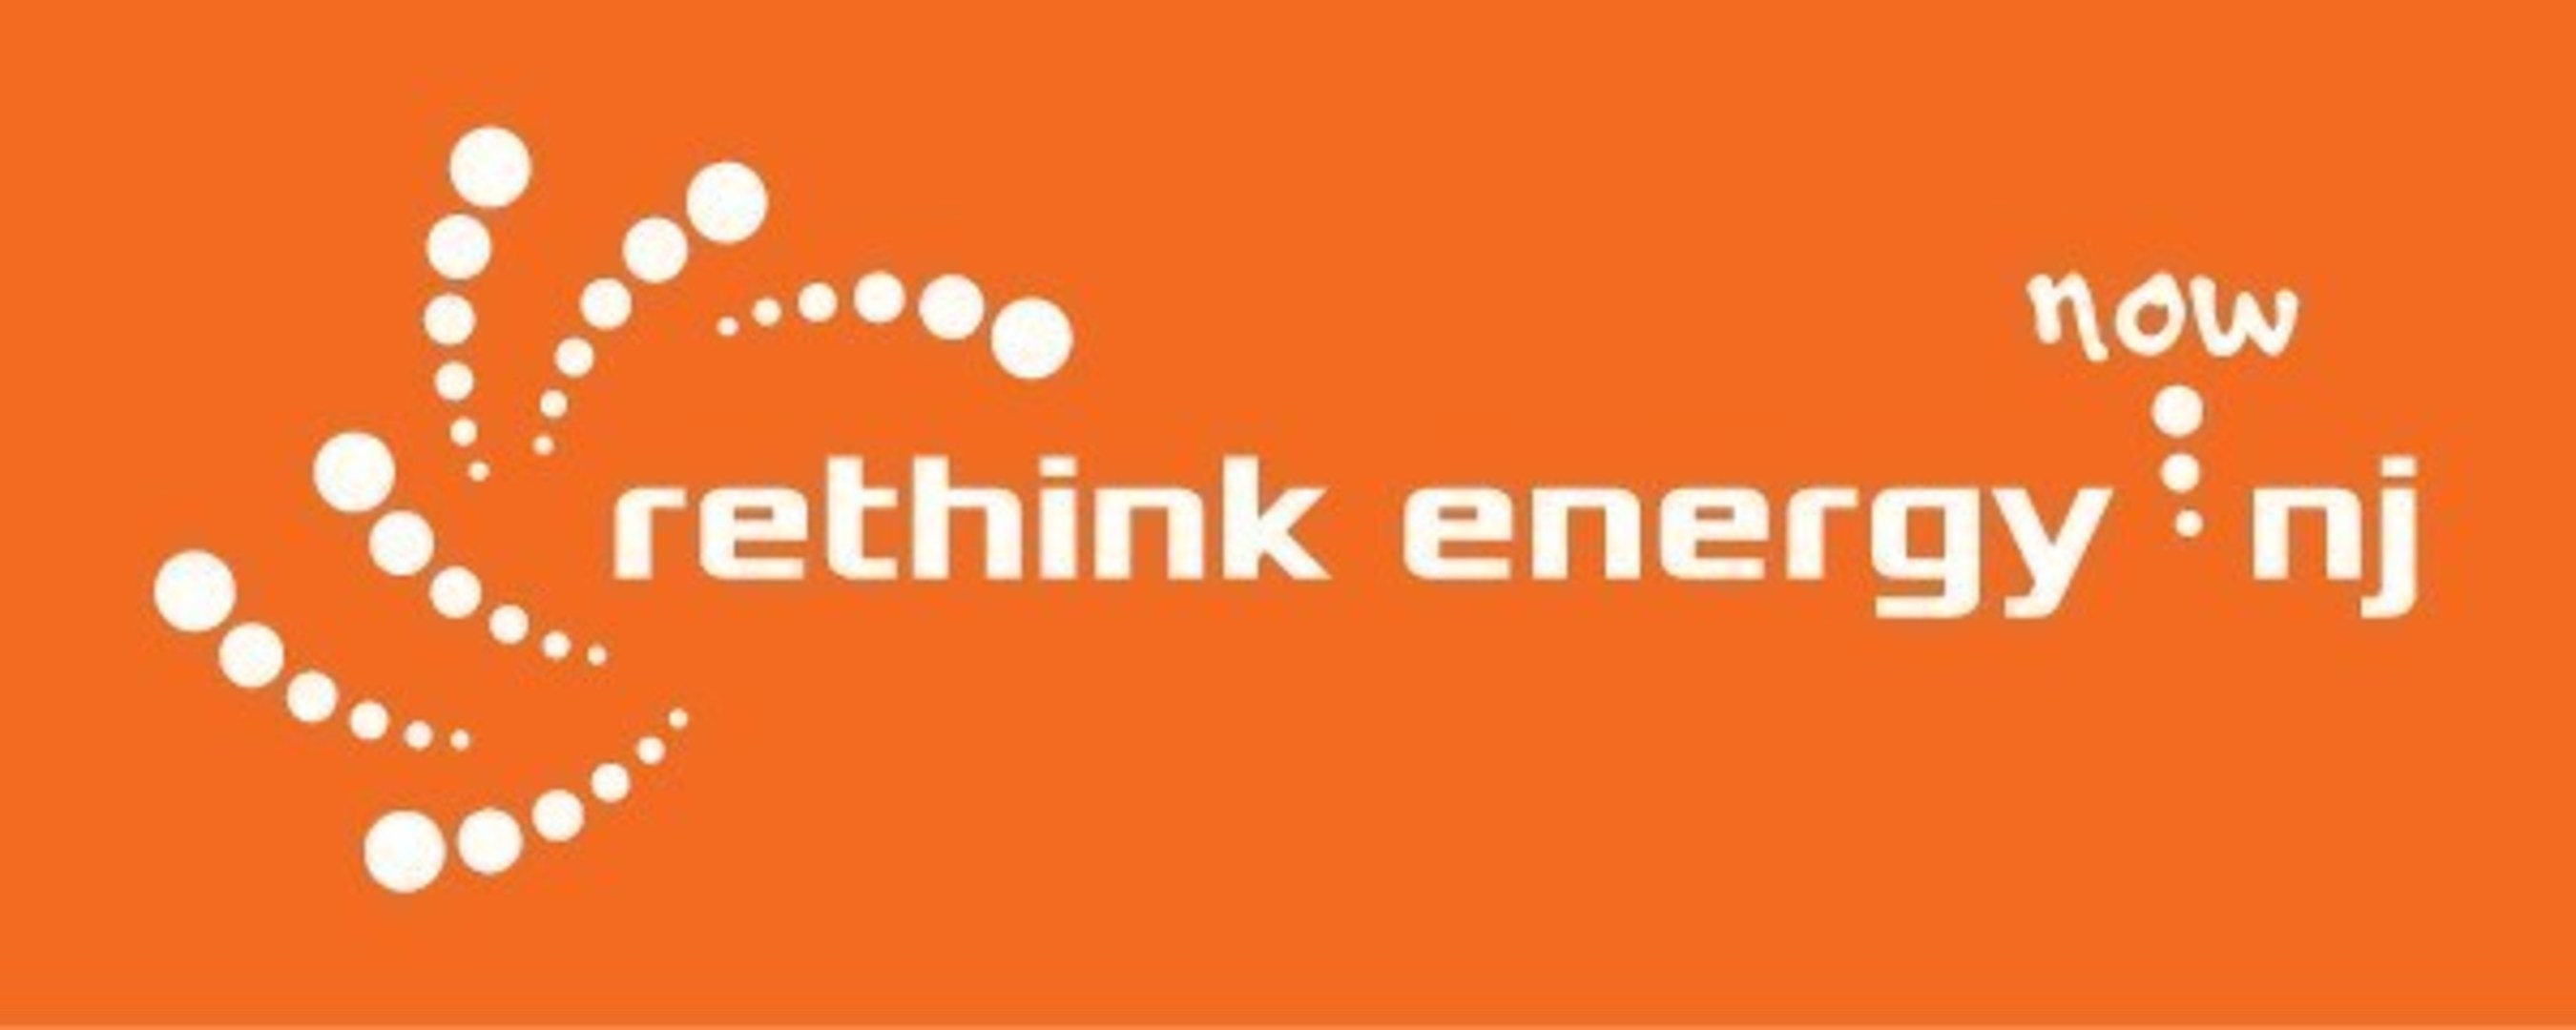 ReThink Energy NJ Campaign to Promote Awareness and Support for Renewable Energy